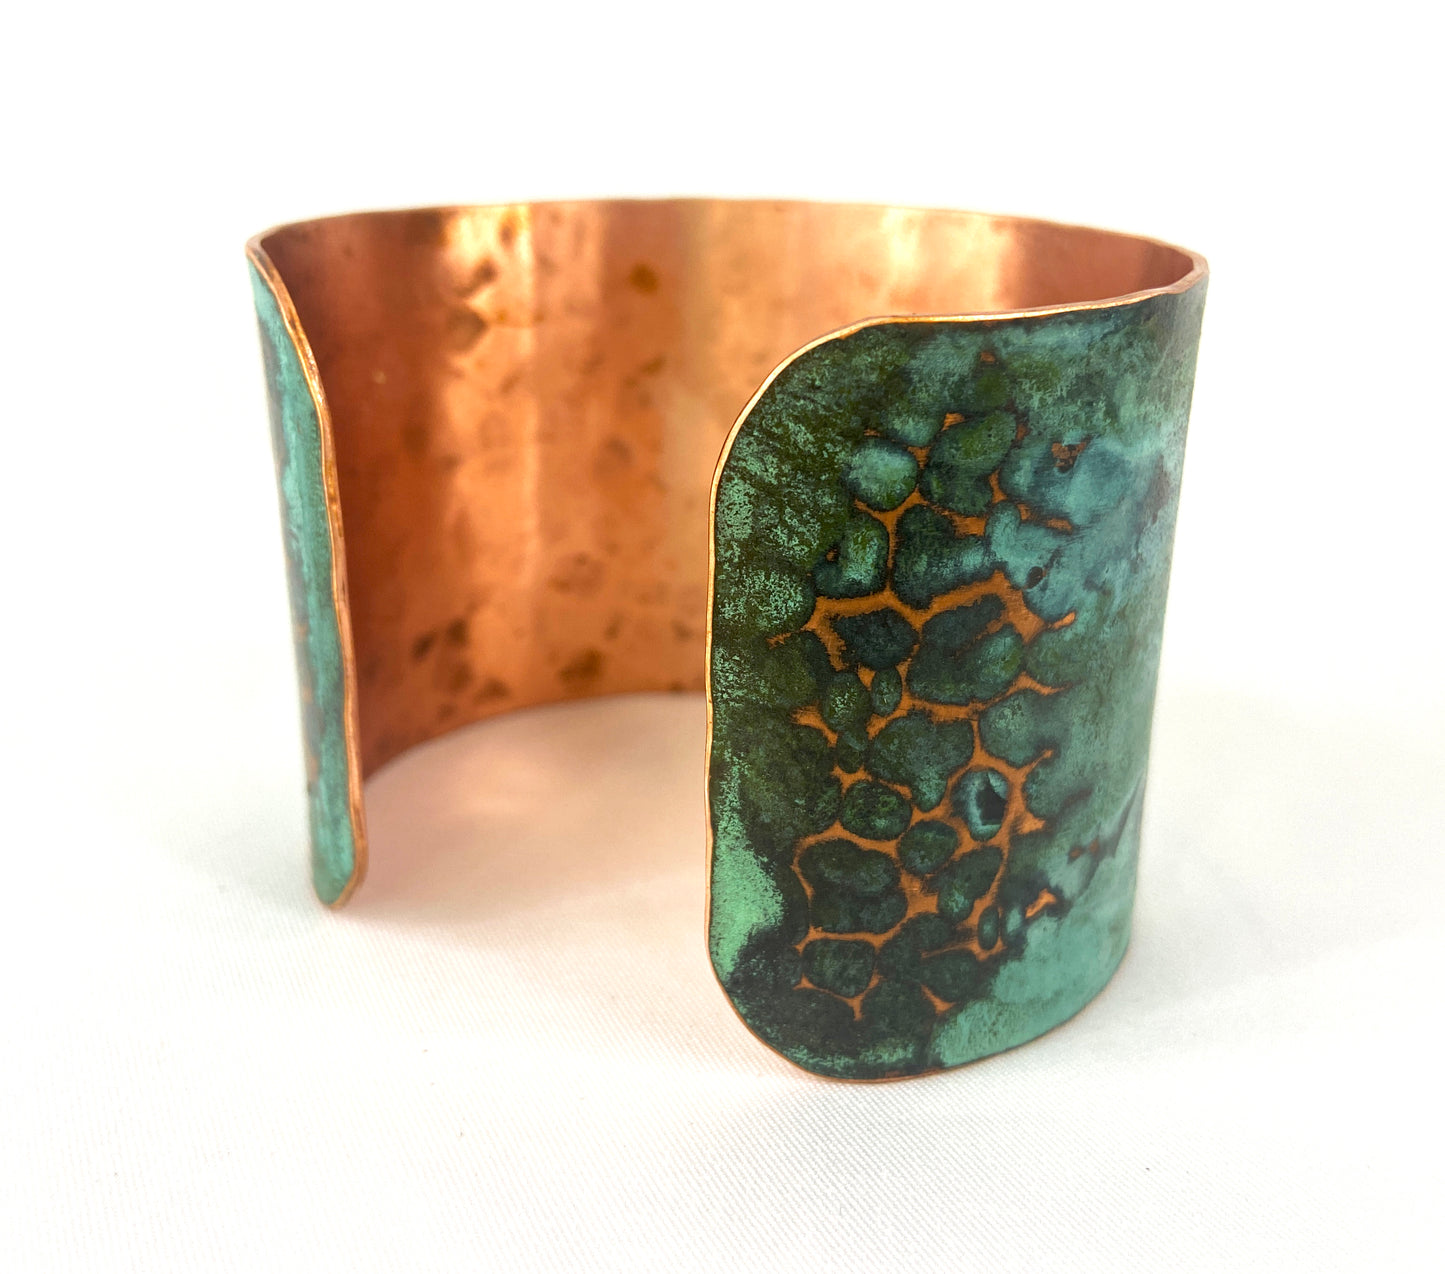 Copper "Crackle" Cuff with Tiffany Patina